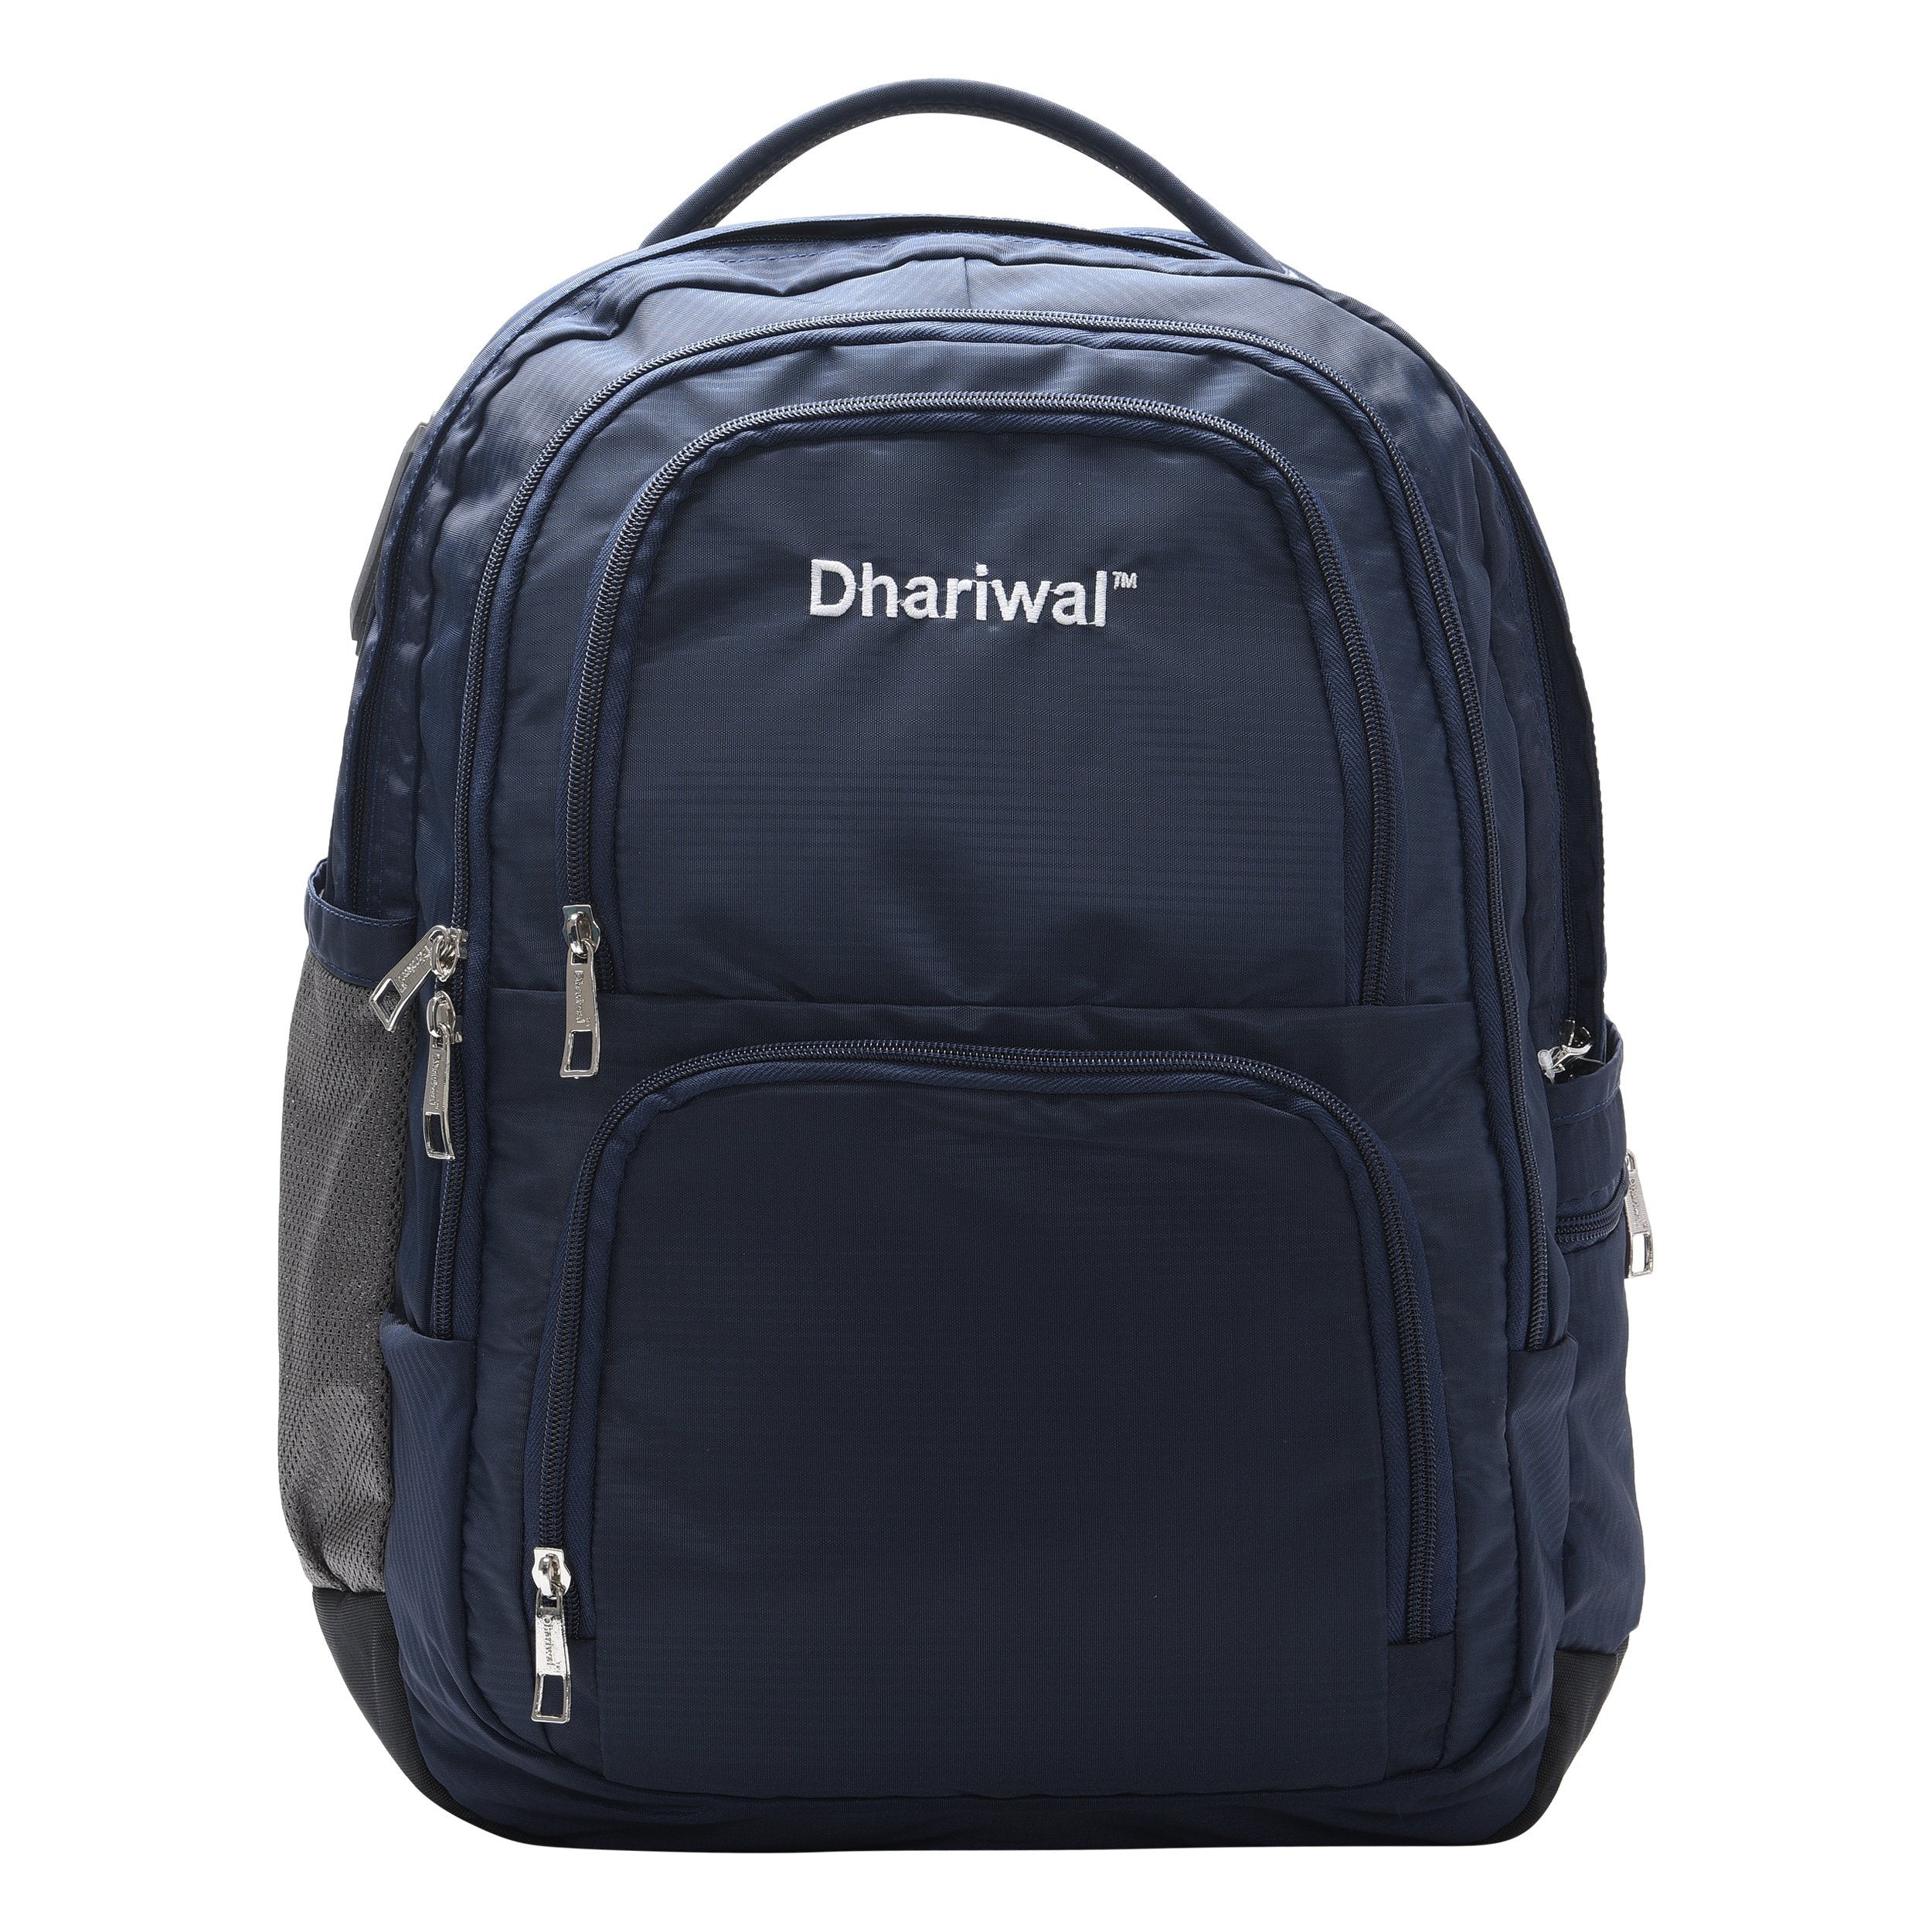 Dhariwal Bags - LADIES ALERT!!! “New handbags are the instant cure for a  bad day” Presenting Dhariwal's twin handle water resistant shopping bag!!!  This bag suits well for casual meetings, college, one